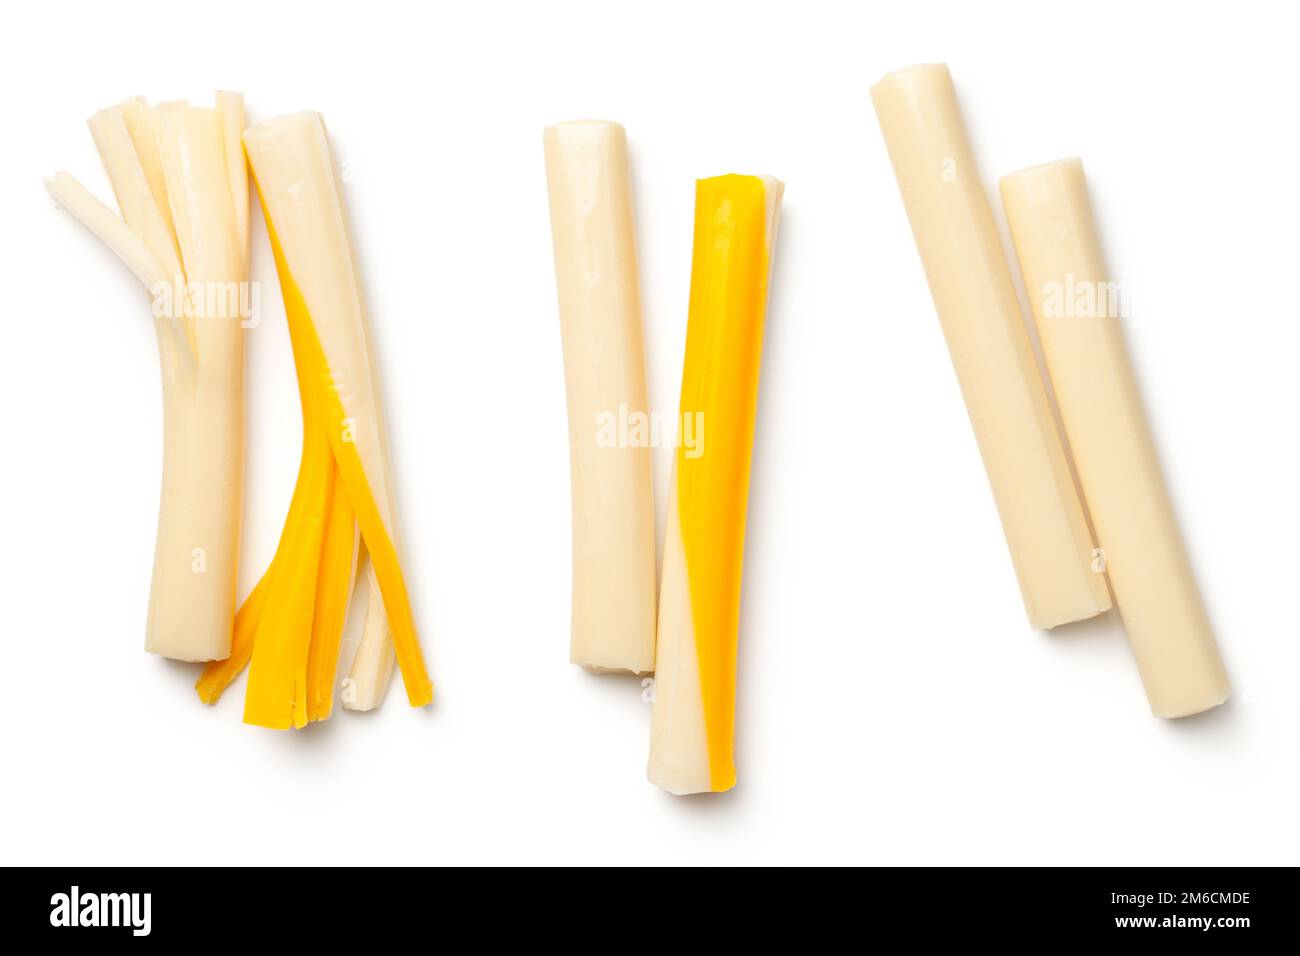 String Cheese Isolated on White Background Stock Photo